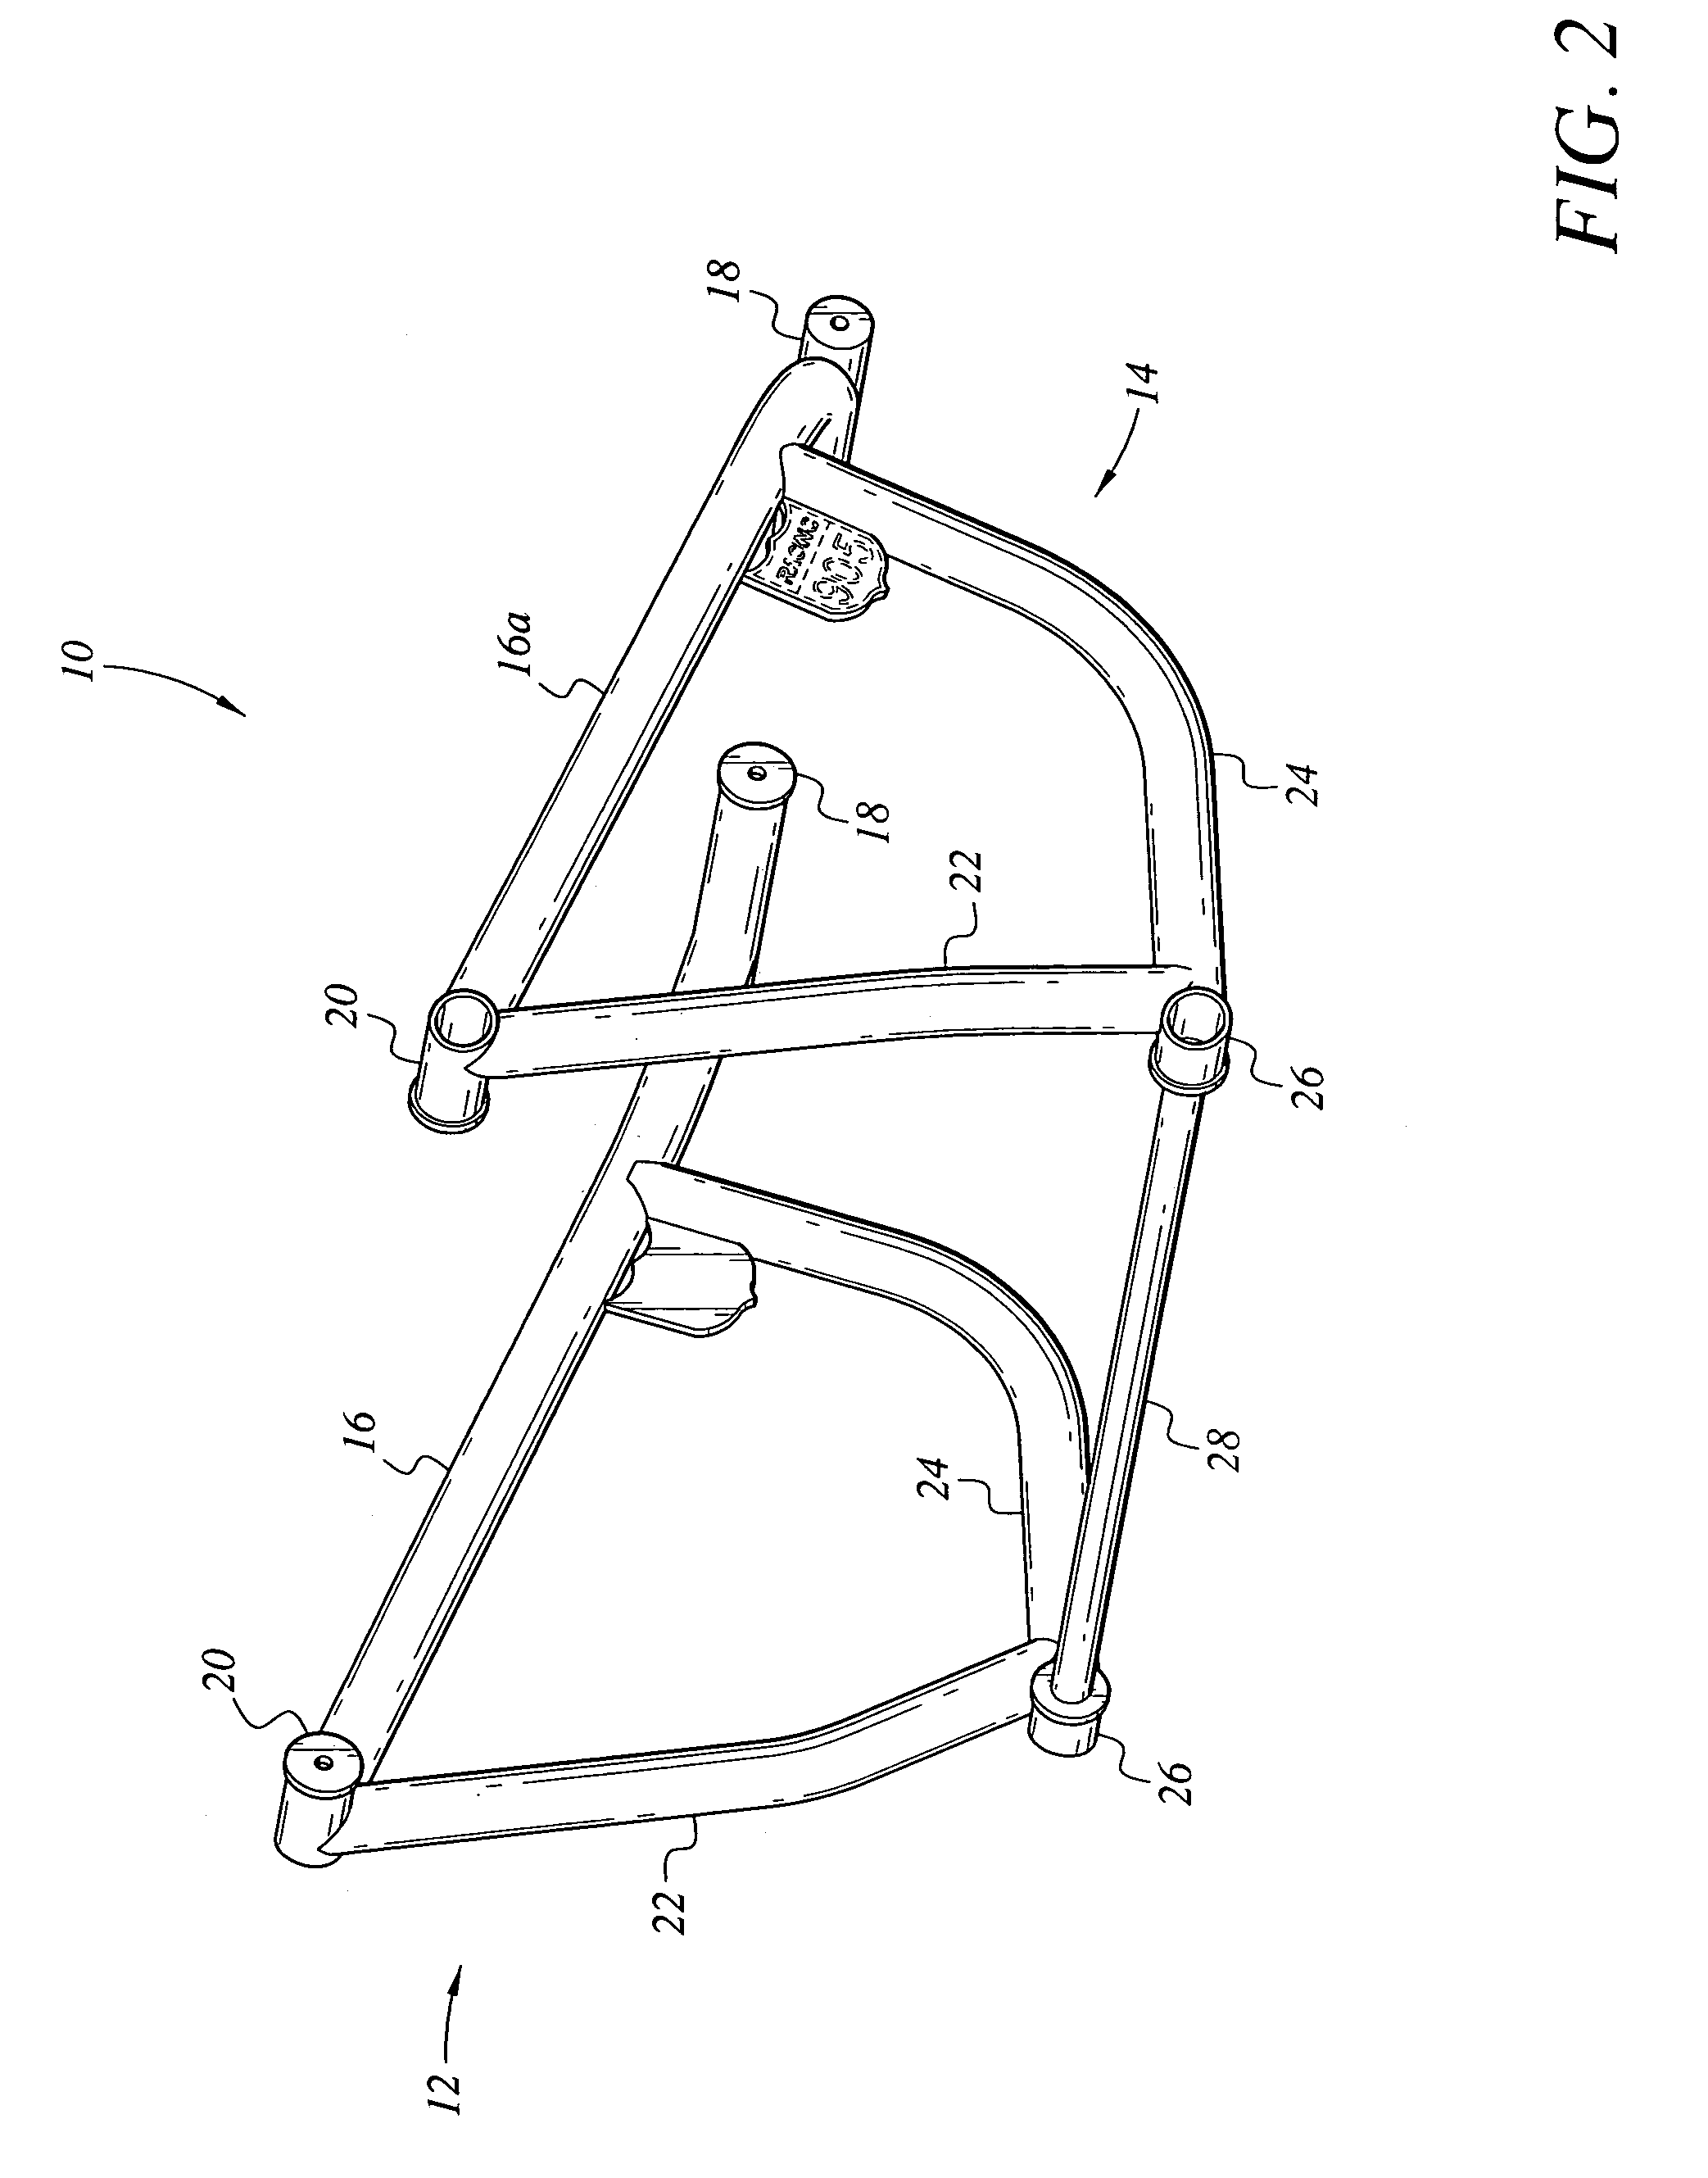 Protective metal cage for motorcycles